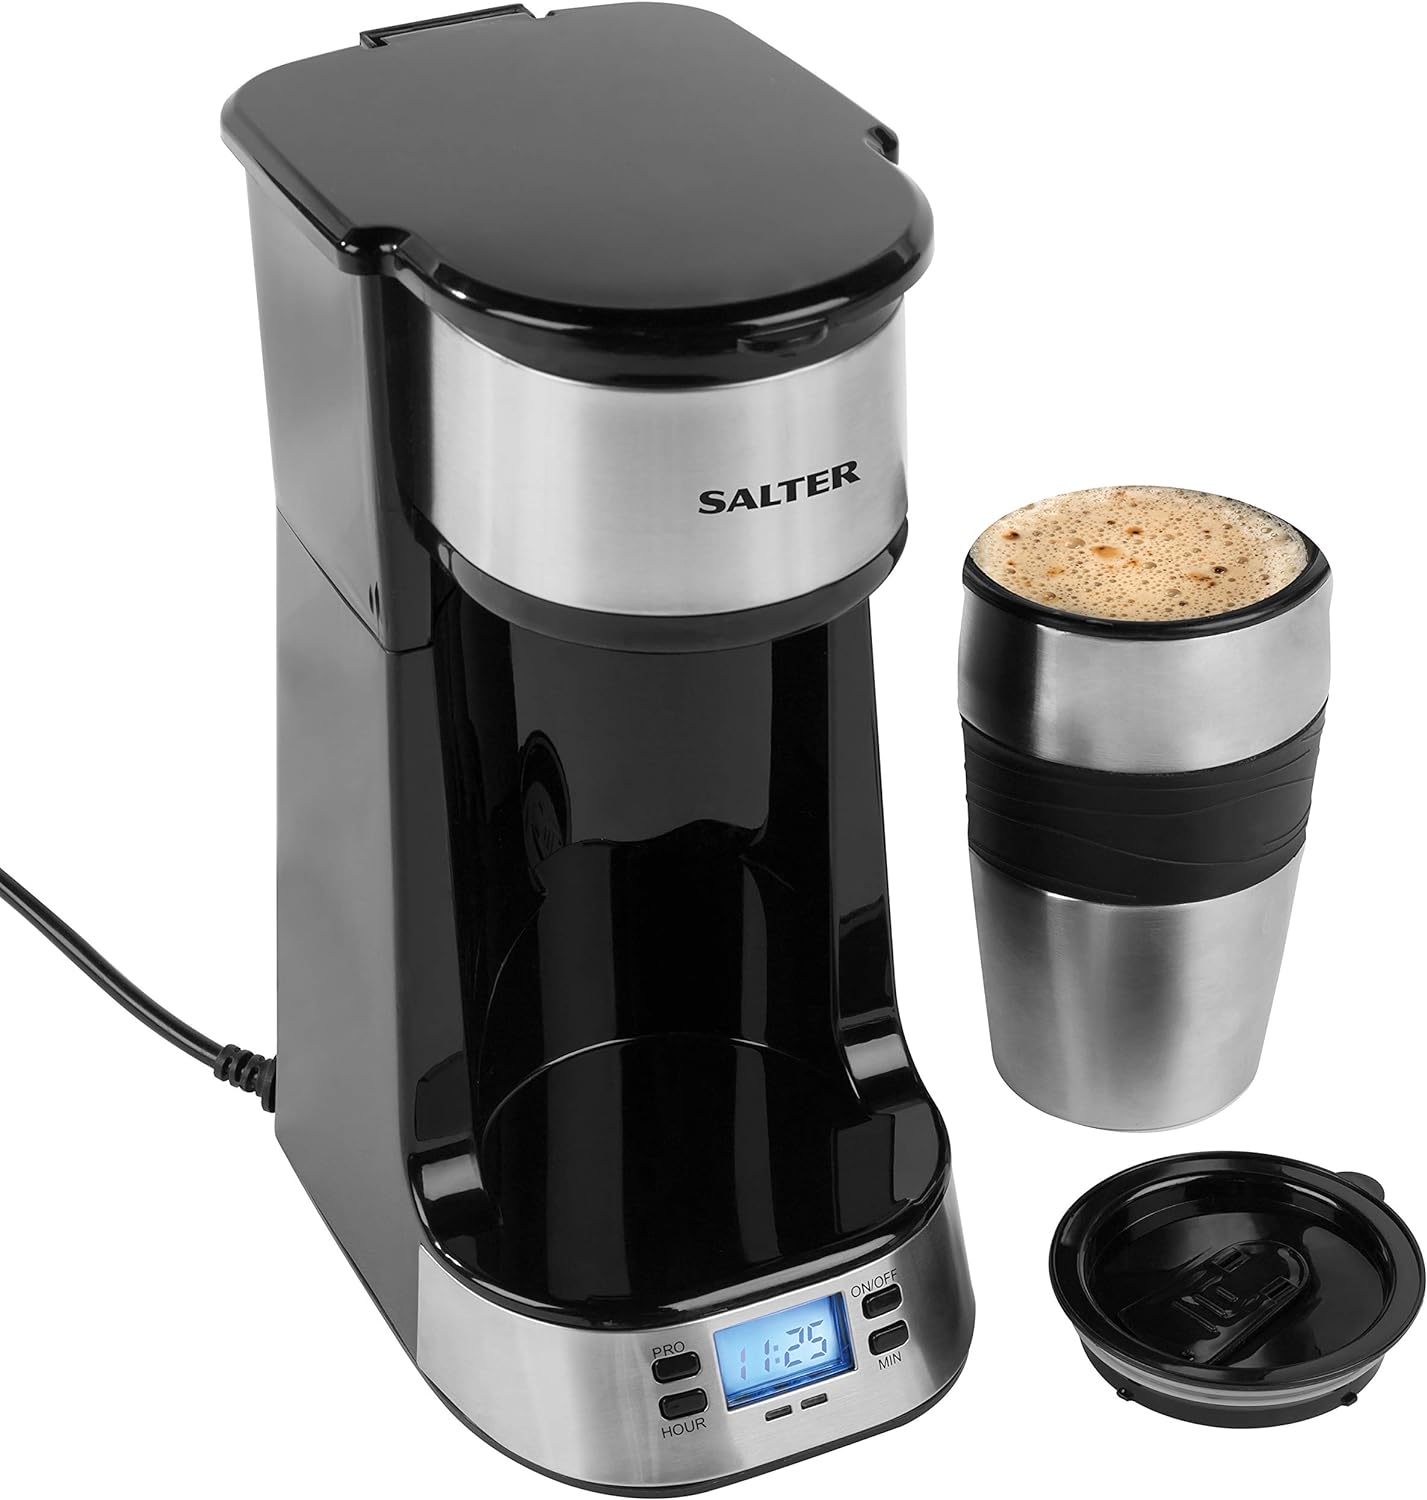 Salter EK2408 One Cup Coffee Maker – Personal Filter Coffee Machine, Washable & Reusable Filter, Includes 420ml Stainless Steel Travel Cup, Brew Single Serve Coffee In 3 - 4 Mins, Use Ground/Coffee Pads - Amazing Gadgets Outlet